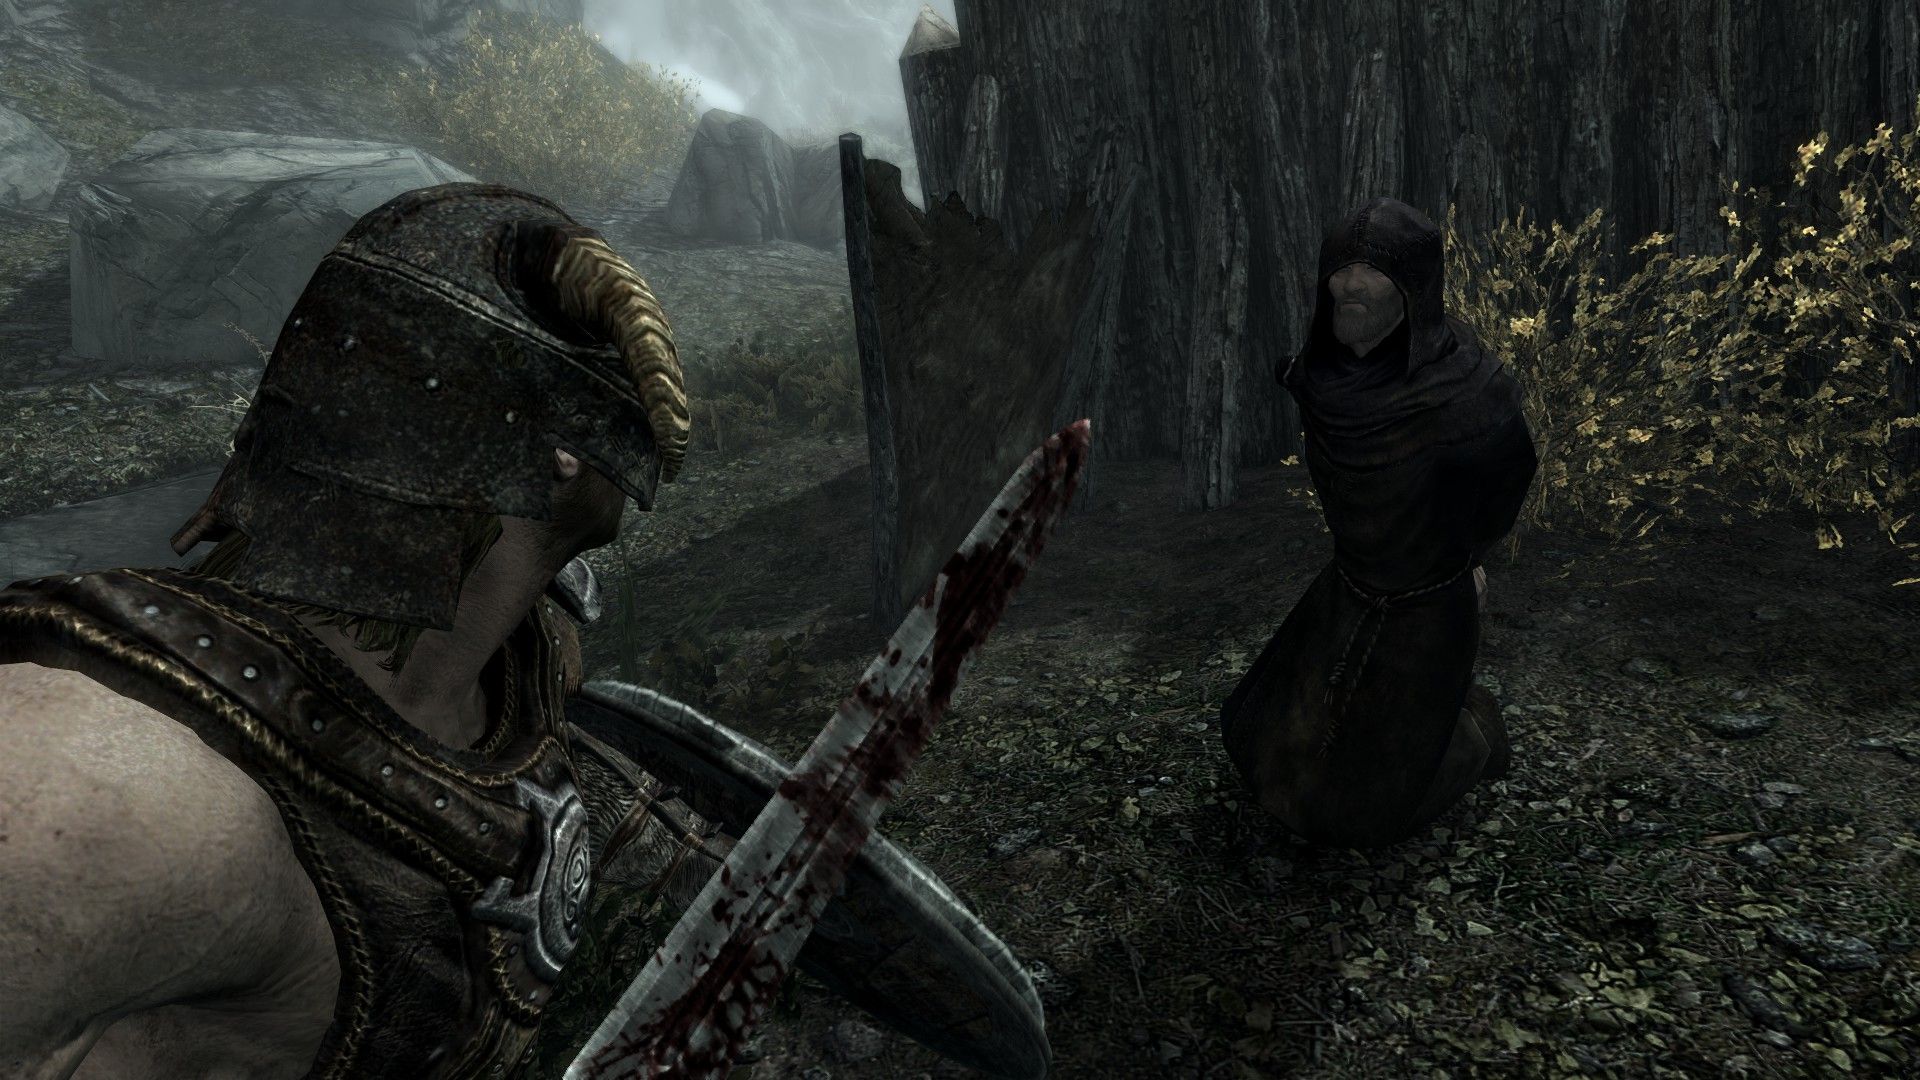 An adventurer brandishing a blood-drenched sword looks at a robed monk on his knees outside, by a fence. 